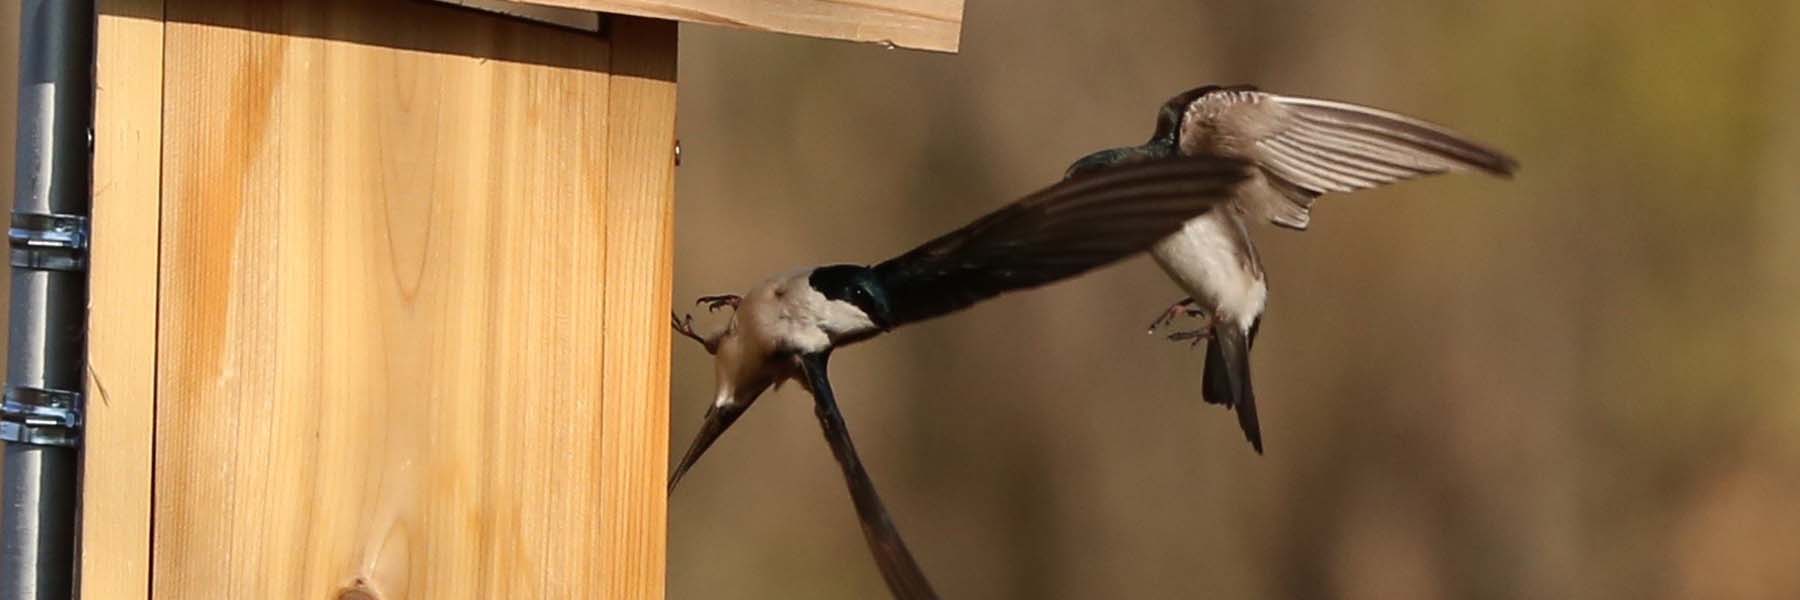 Two swallows dodging each other at nest box.